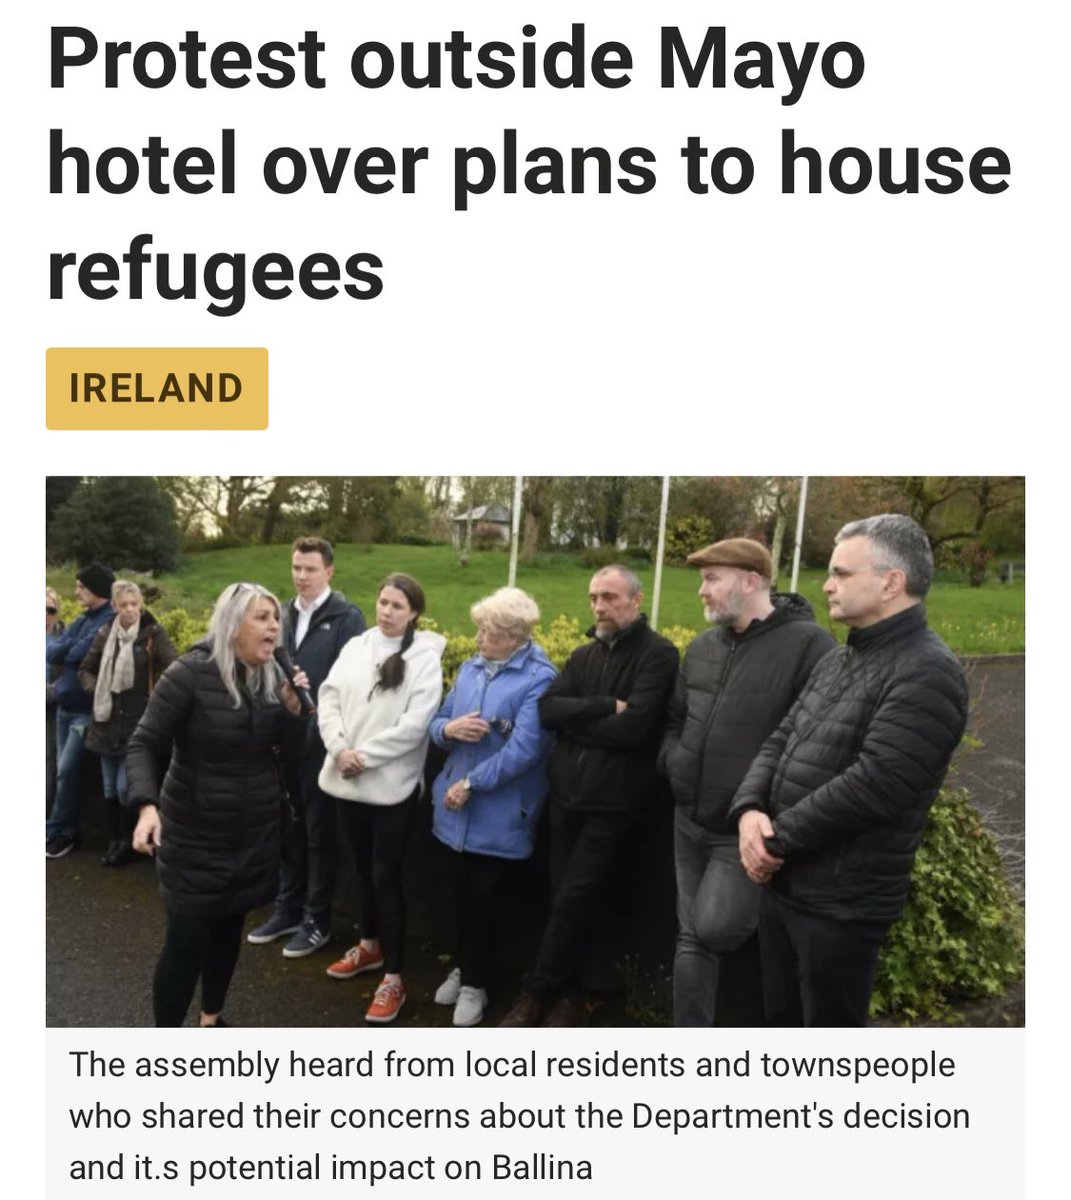 Ireland 📍🇮🇪

The Department of Children, Equality, Disability, Integration and Youth has agreed to use 33 of the hotels bedrooms to accommodate 120 “asylum seekers”.

#IrelandisFull #IrelandOptsOut